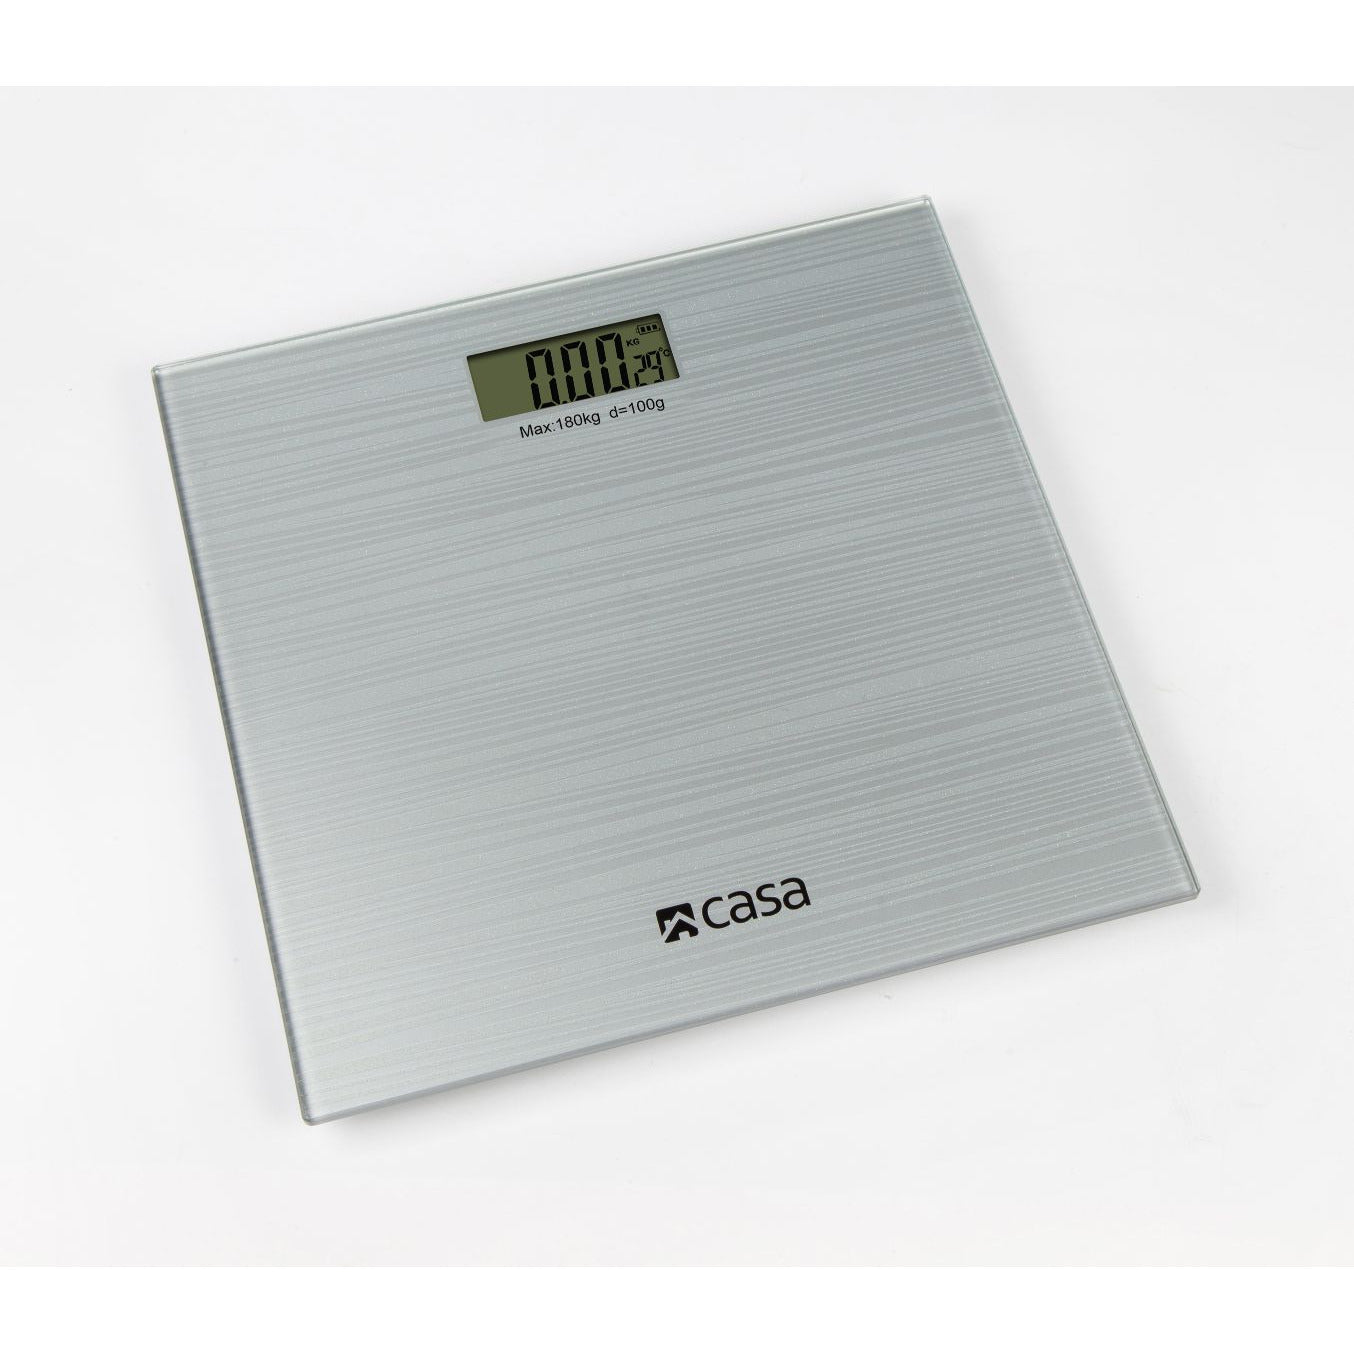 ELECTRONIC SPARKLE GLASS BATHROOM SCALE - ARGENTO (SILVER)